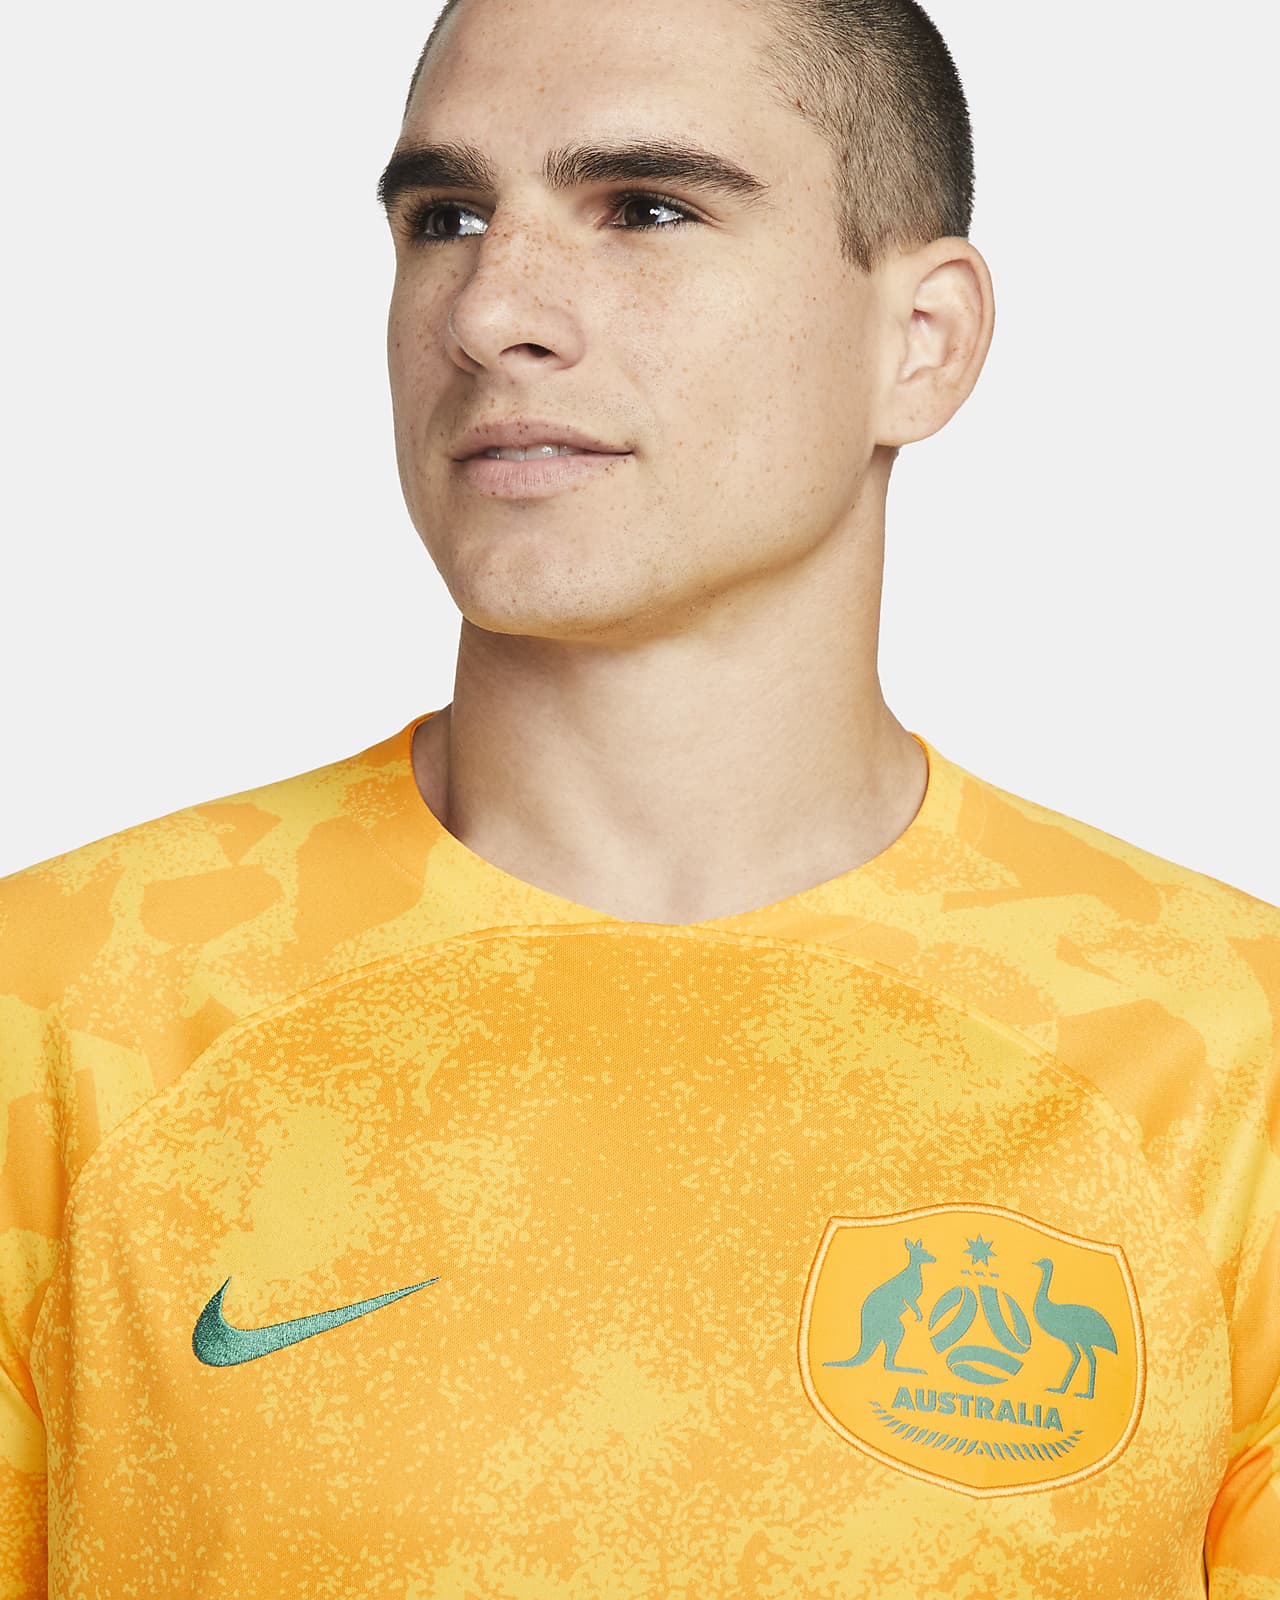 socceroos jersey for sale